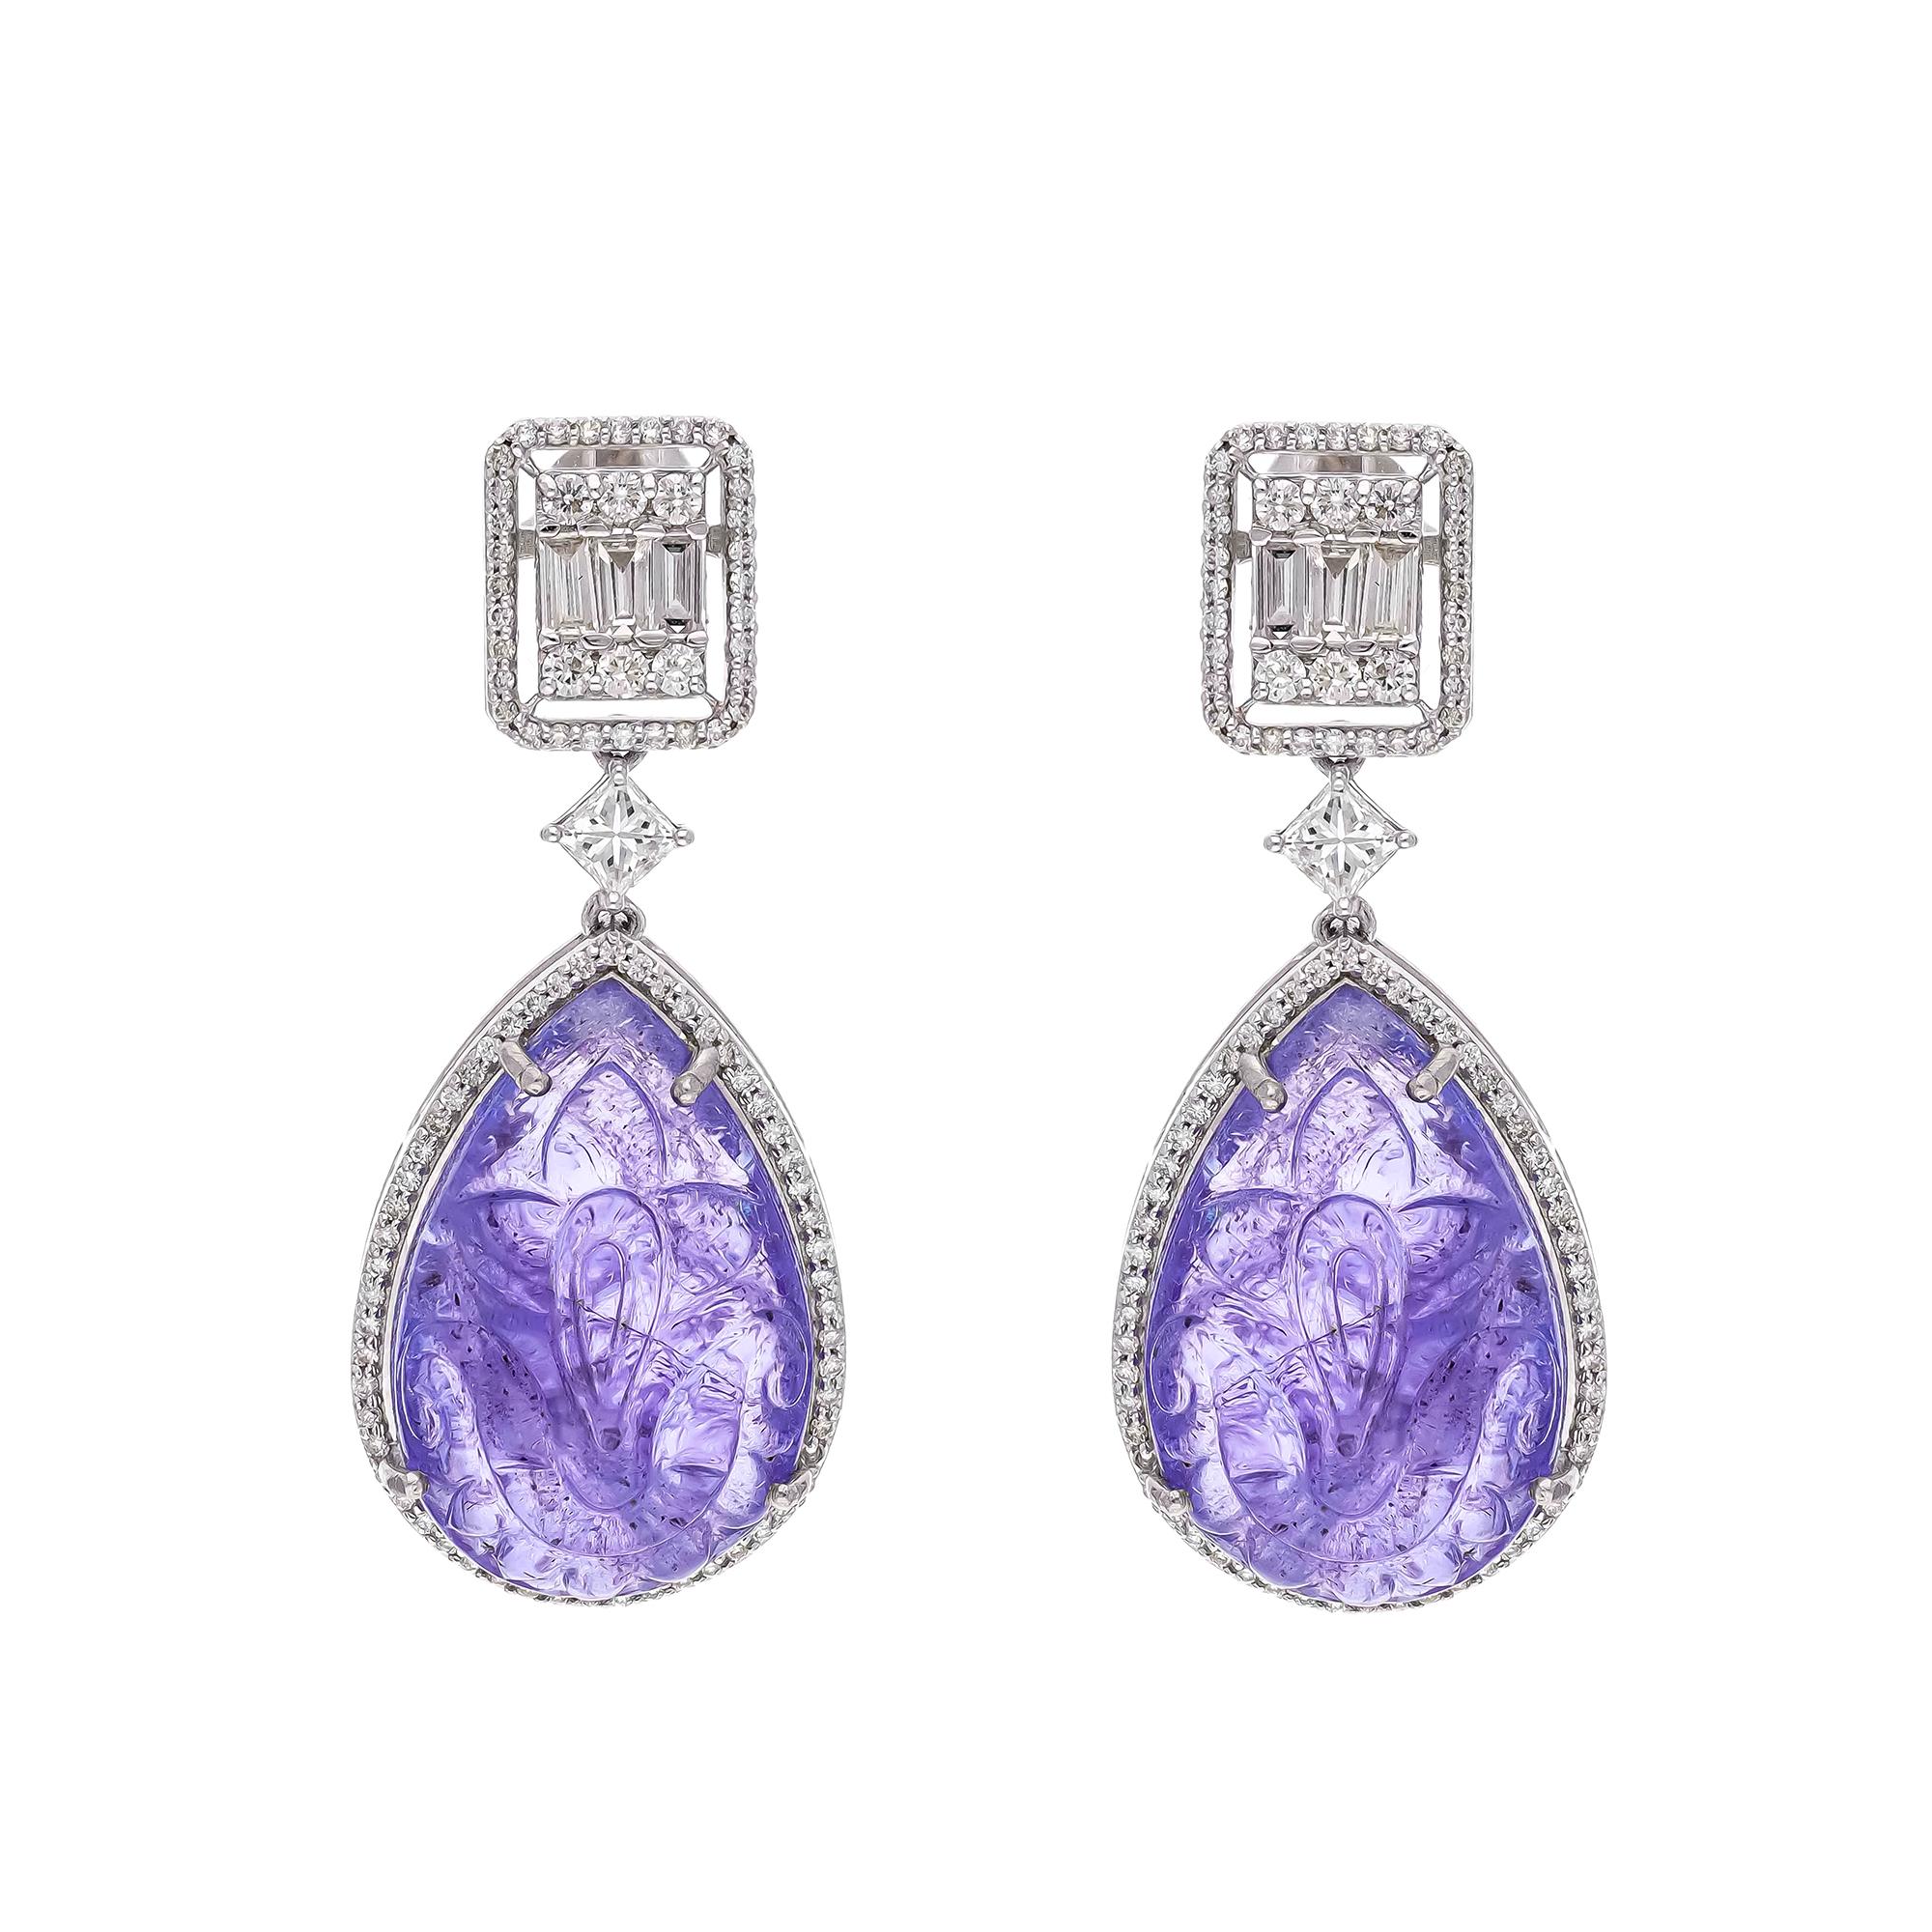 Mixed Cut Natural Tanzenite Earring with 1.86 Cts Diamond & Tanzenite 35.40 Cts in 18k For Sale